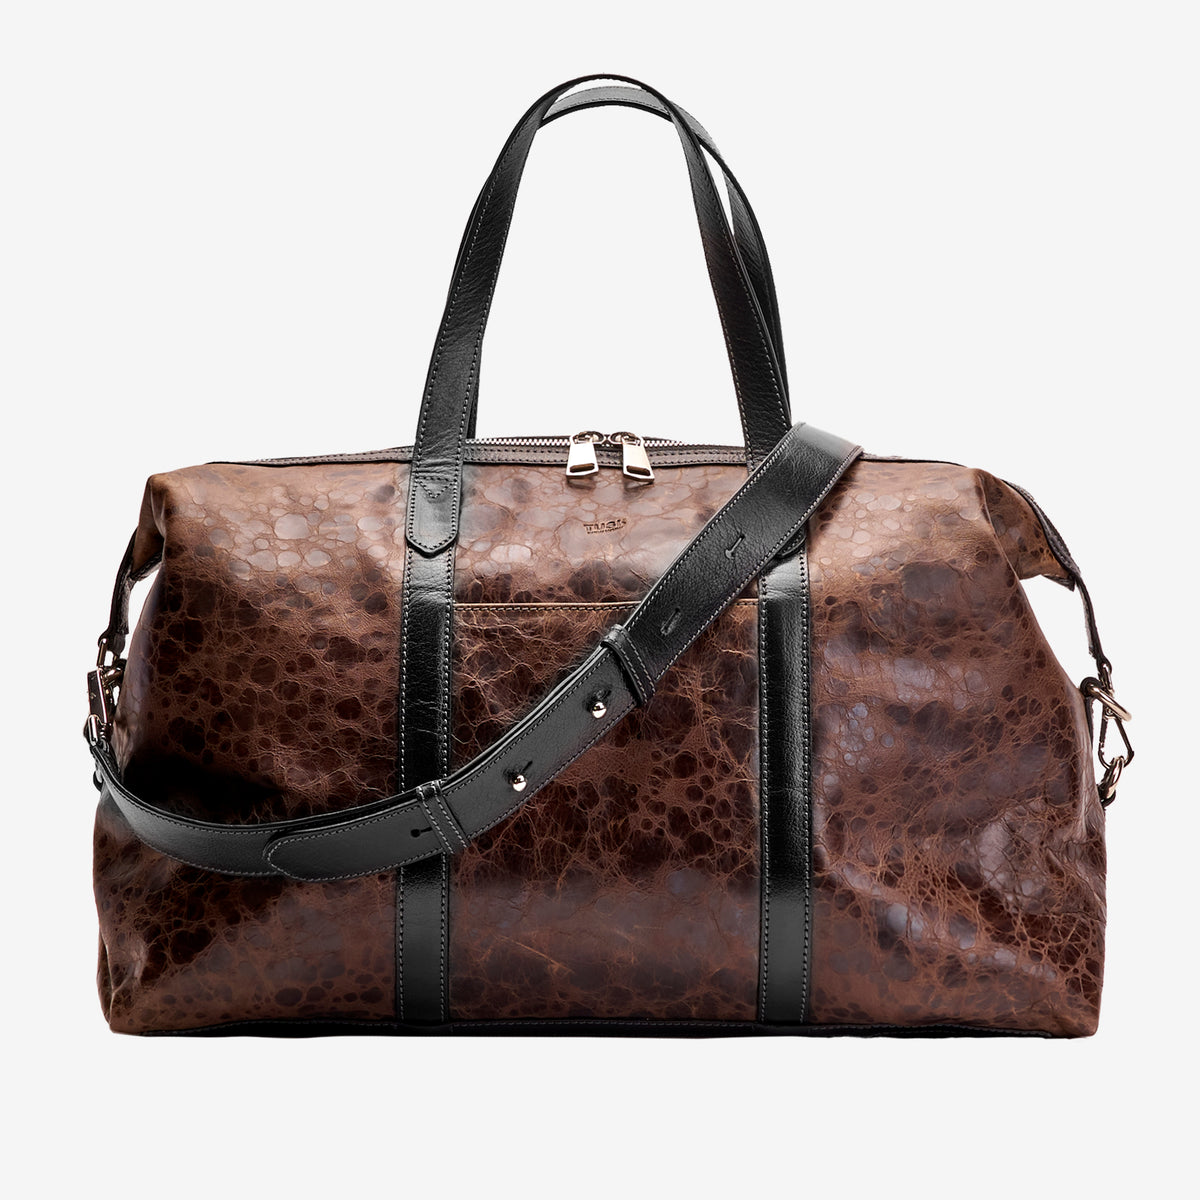 tusk-9920-spotty-leather-everyday-duffel-bag-chocolate-detail-